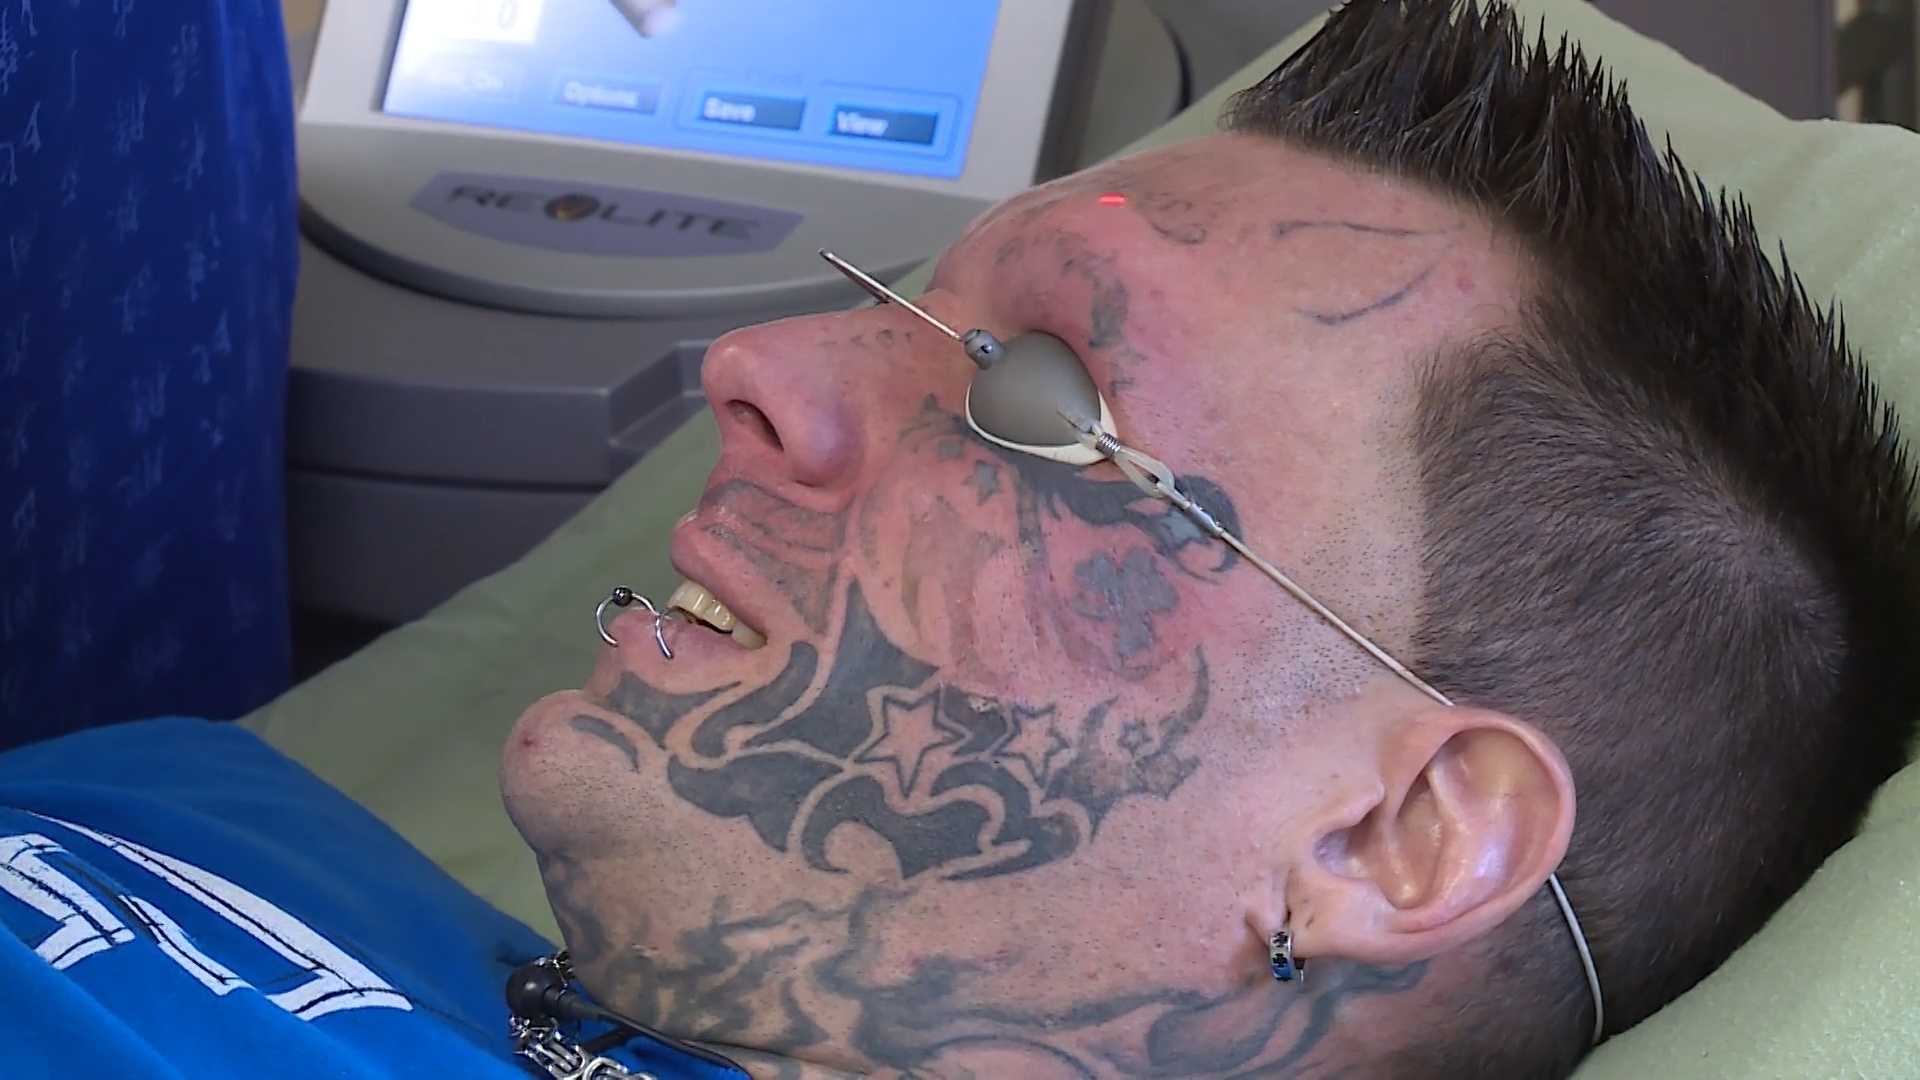 Tattoo Weeping: Should You Be Concerned If Your New Tattoo Is Leaking Fluid?